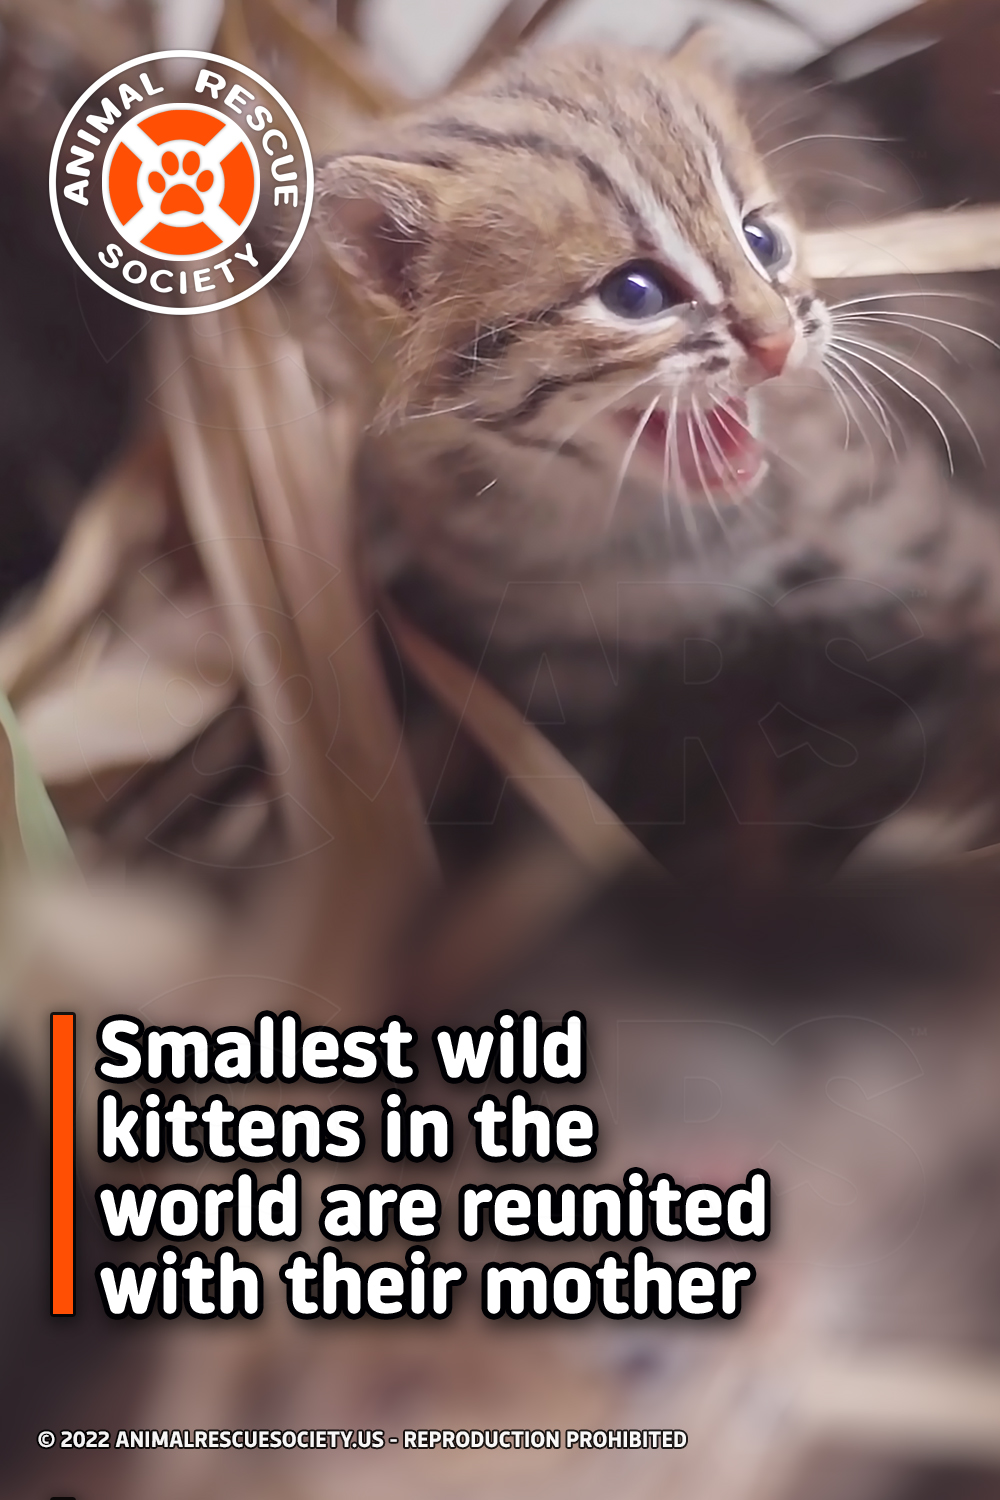 Smallest wild kittens in the world are reunited with their mother